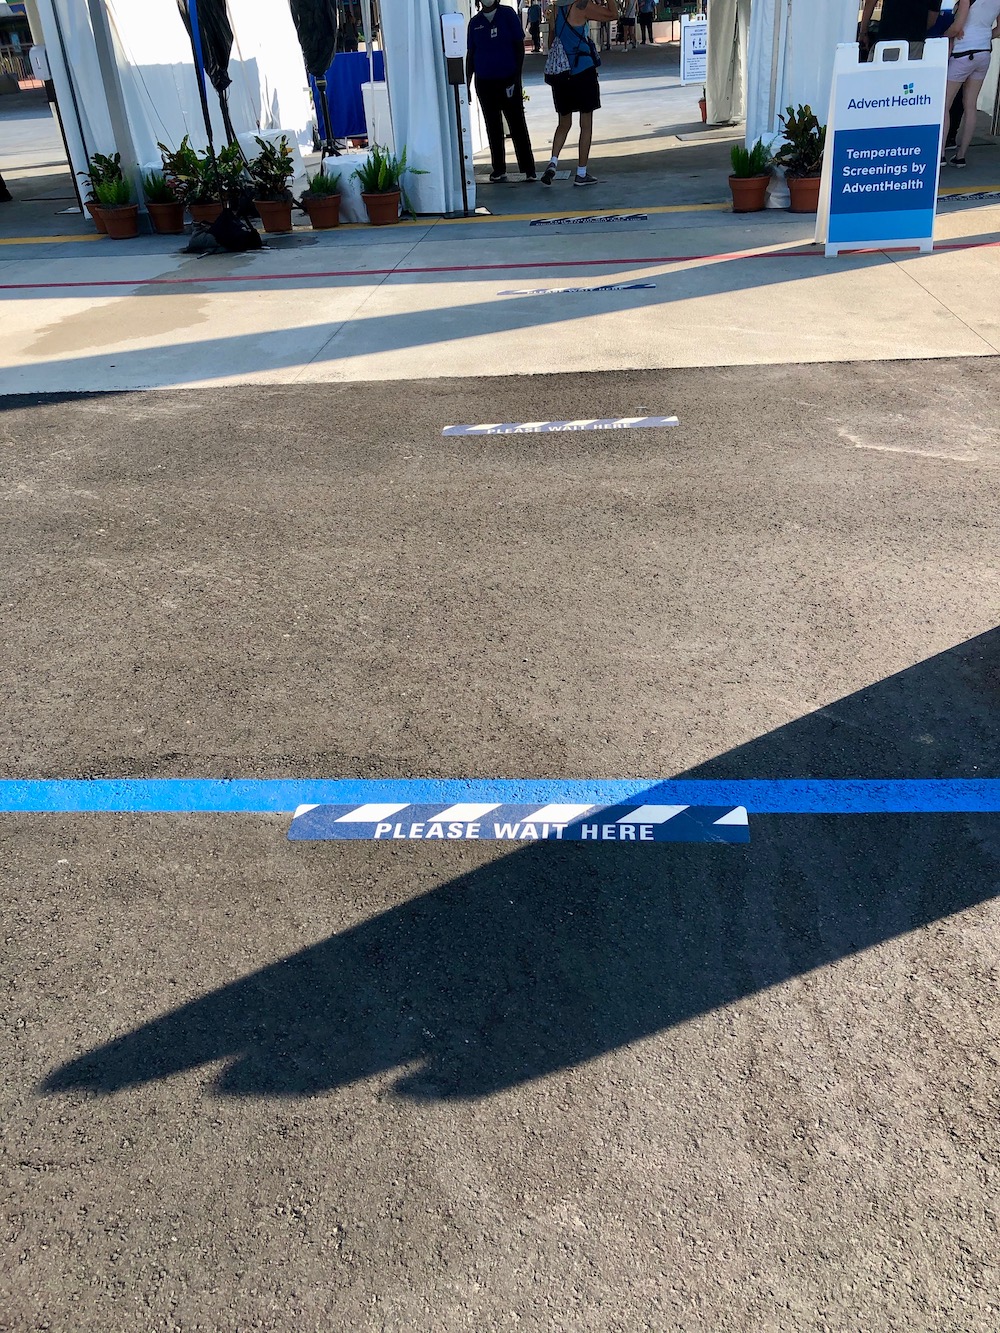 Ground markings to promote physical distancing at temperature screenings and throughout the Disney Parks. 